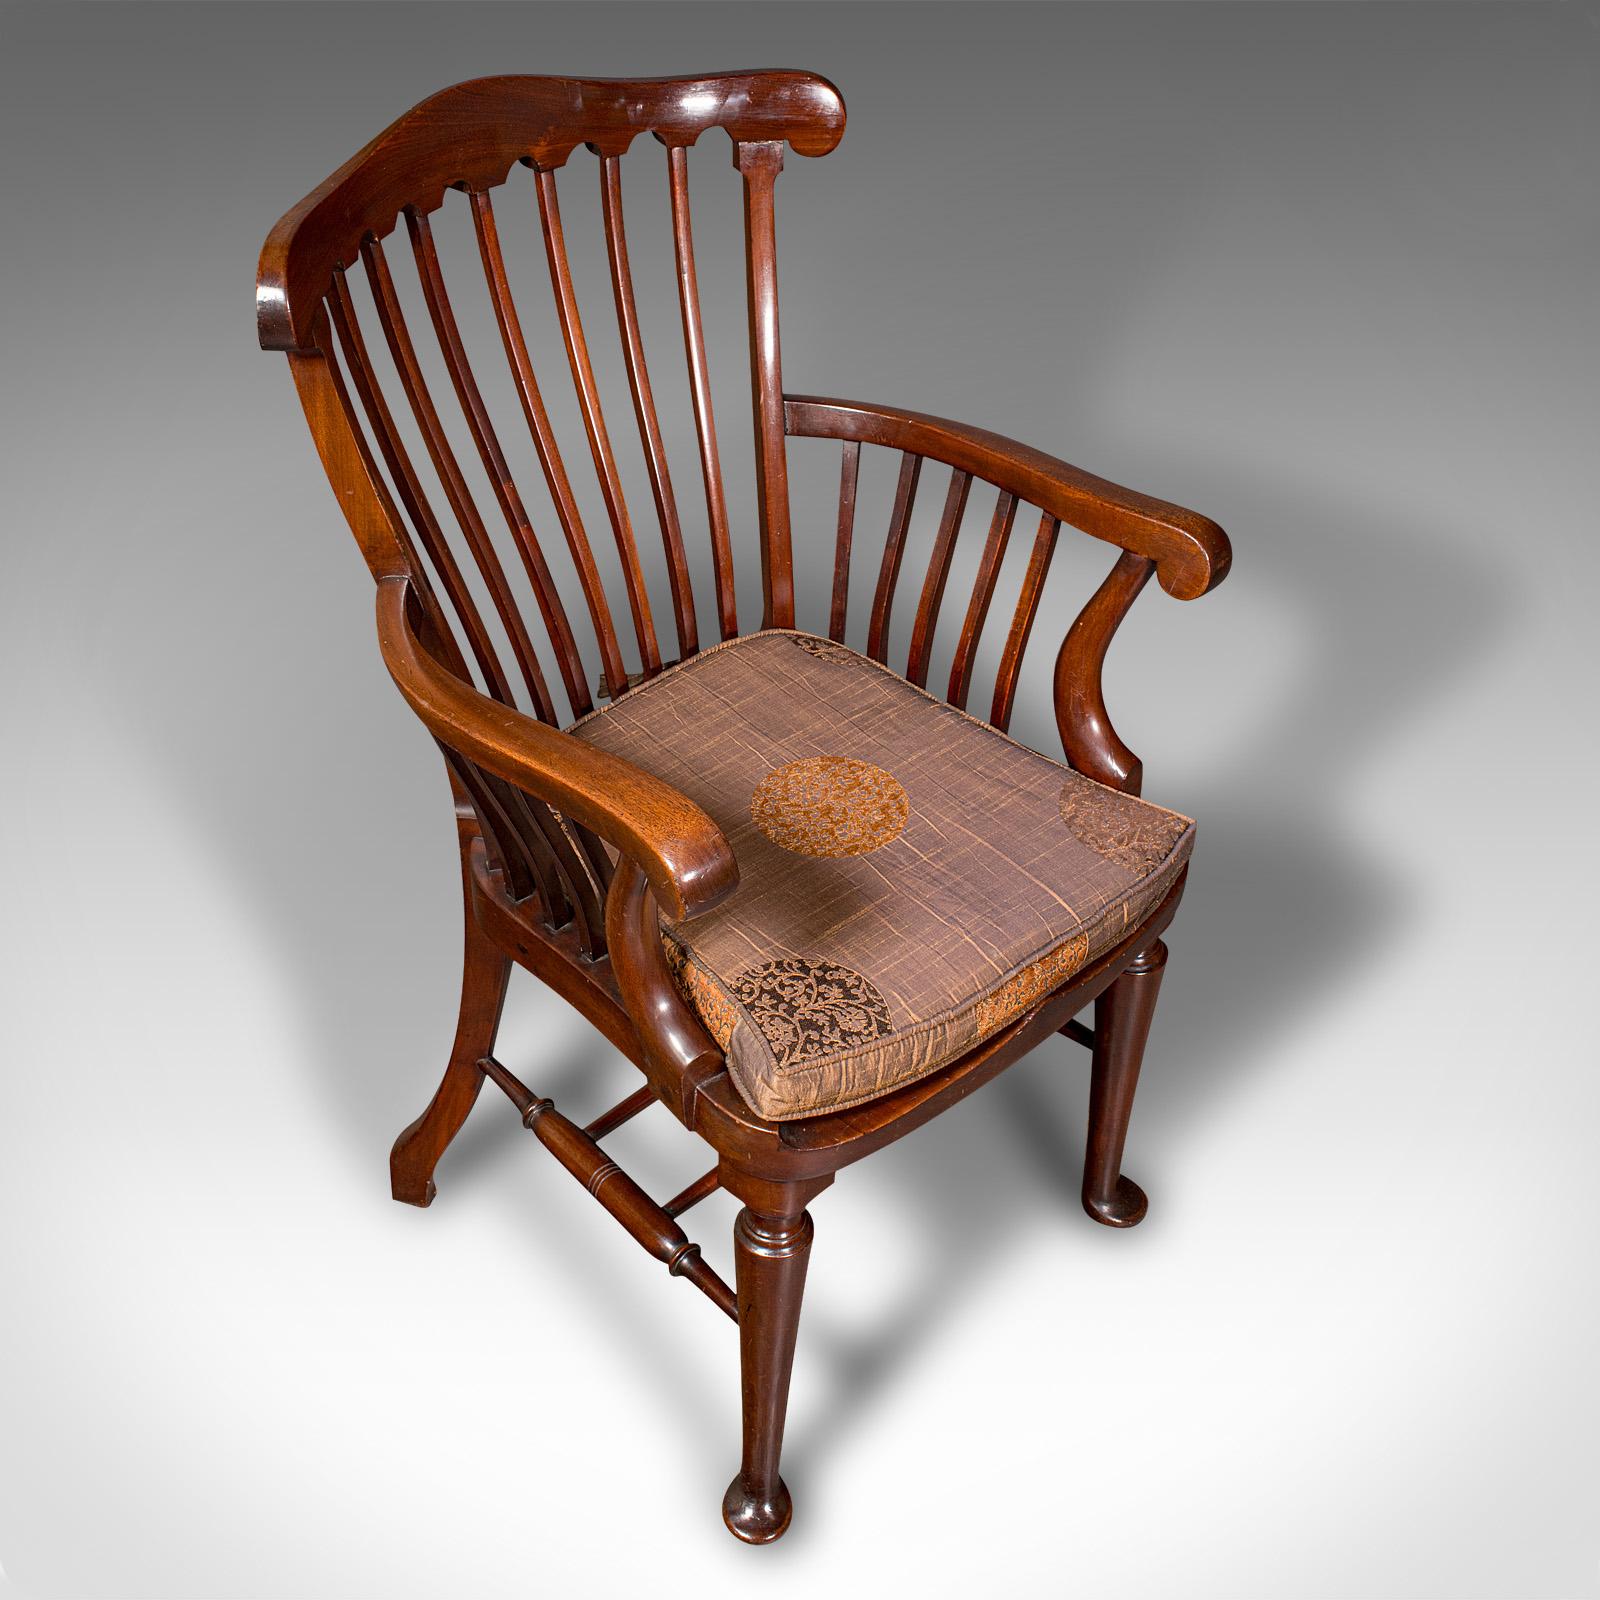 Beech Antique Cleric's Armchair, English, Elbow Chair, Georgian Revival, Victorian For Sale